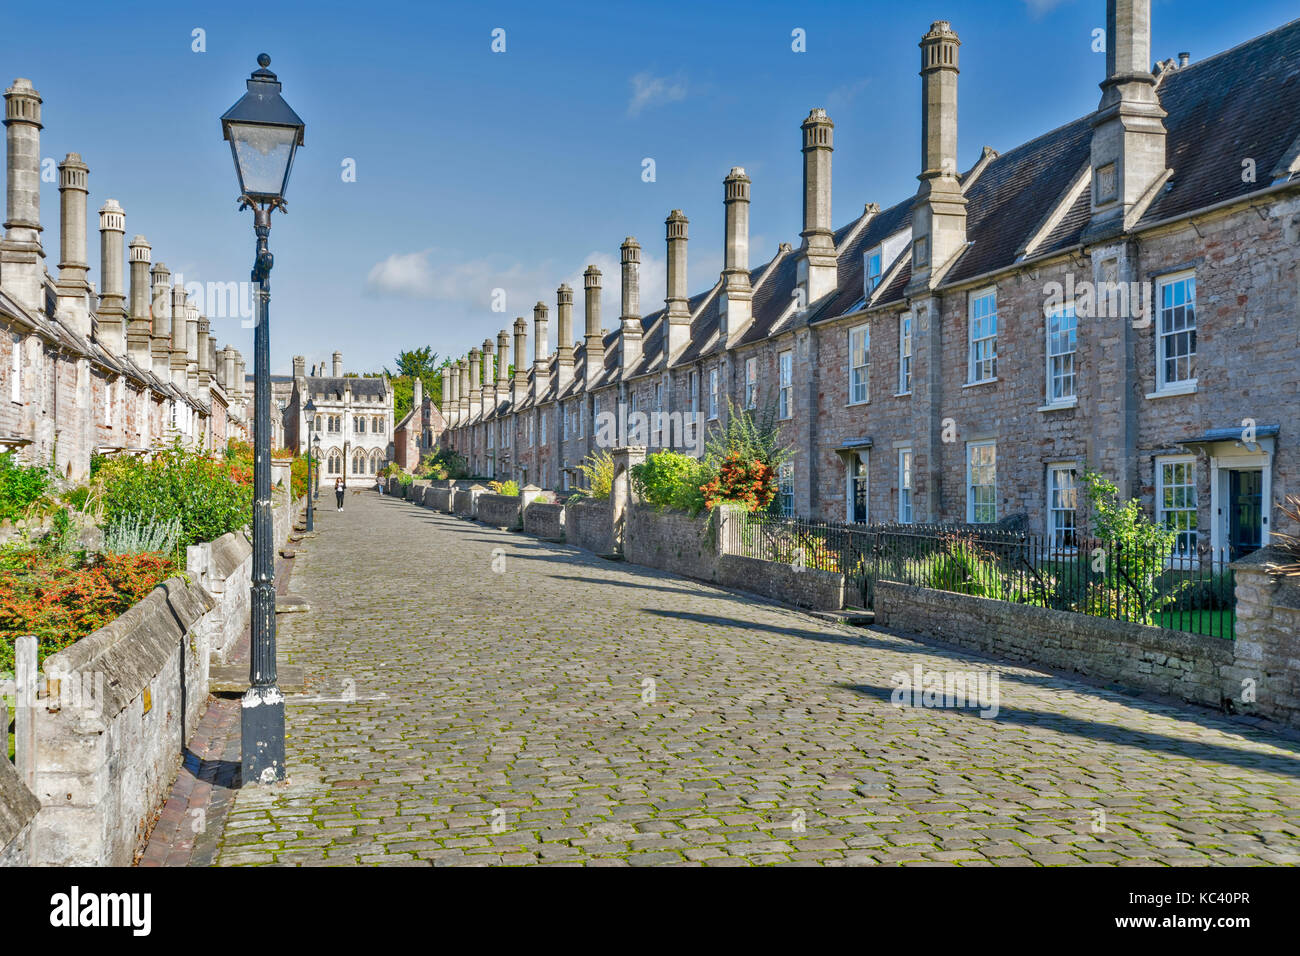 WELLS CITY SOMERSET ENGLAND CATHEDRAL VICARS CLOSE THE OLDEST MEDIEVAL RESIDENTIAL STREET IN EUROPE Stock Photo